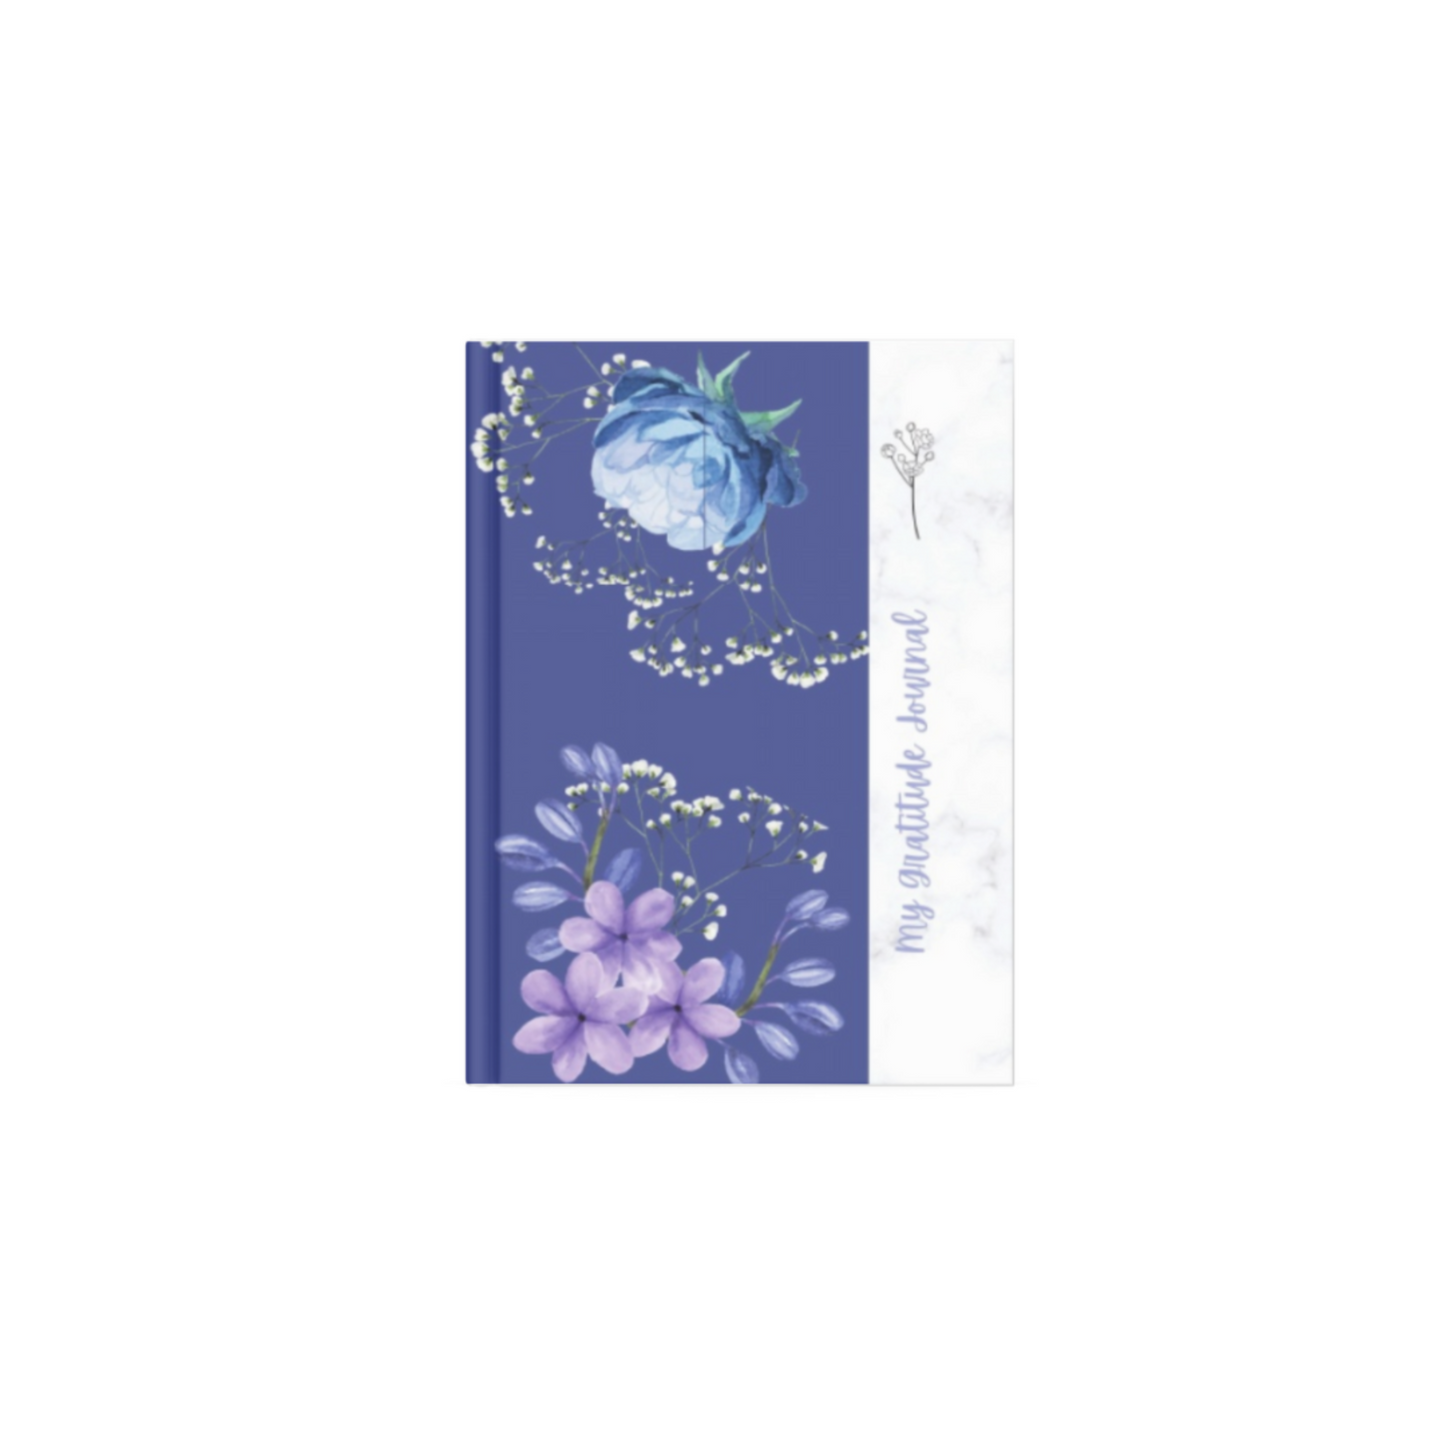 Floral self-care notebook